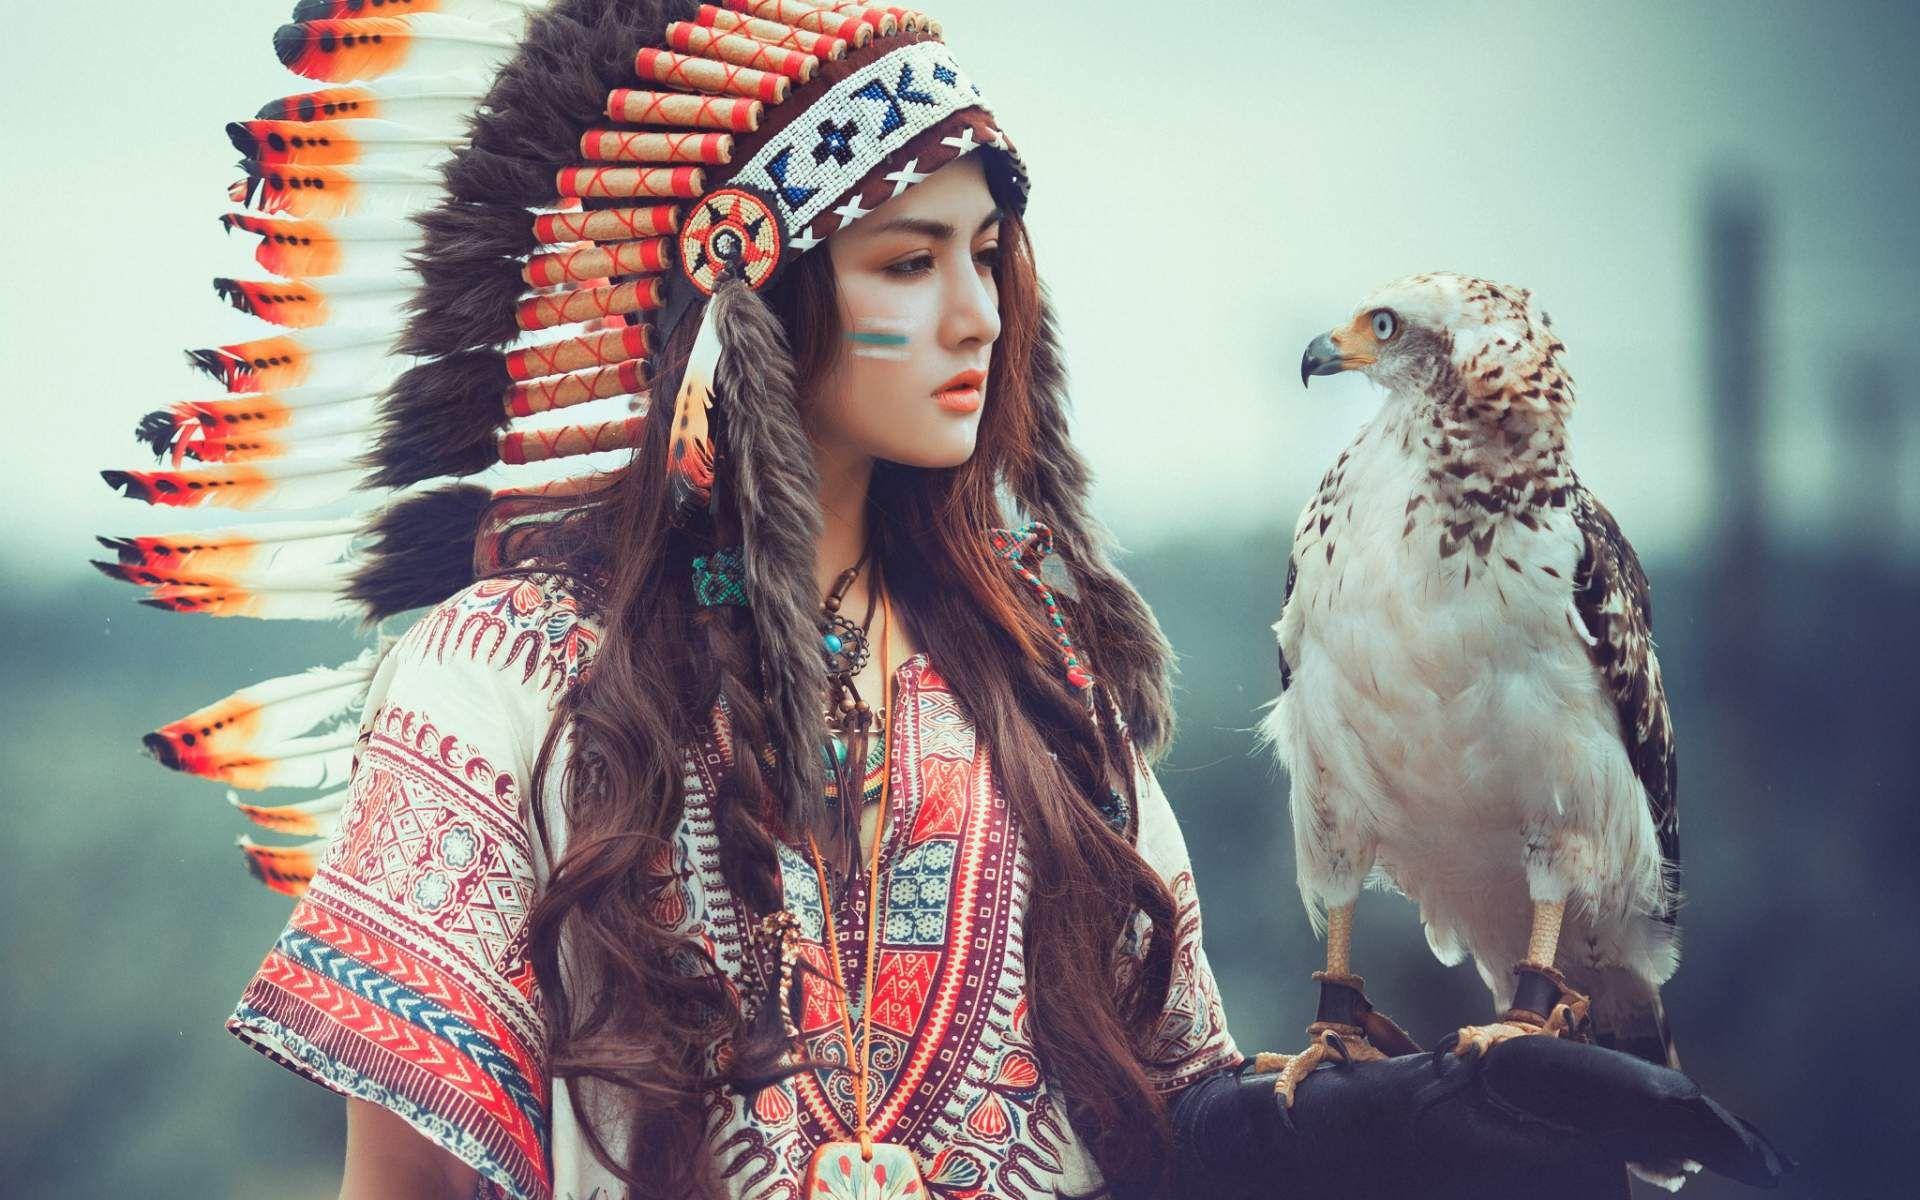 American Indian Girl HD Wallpaper for desktop and mobile in high